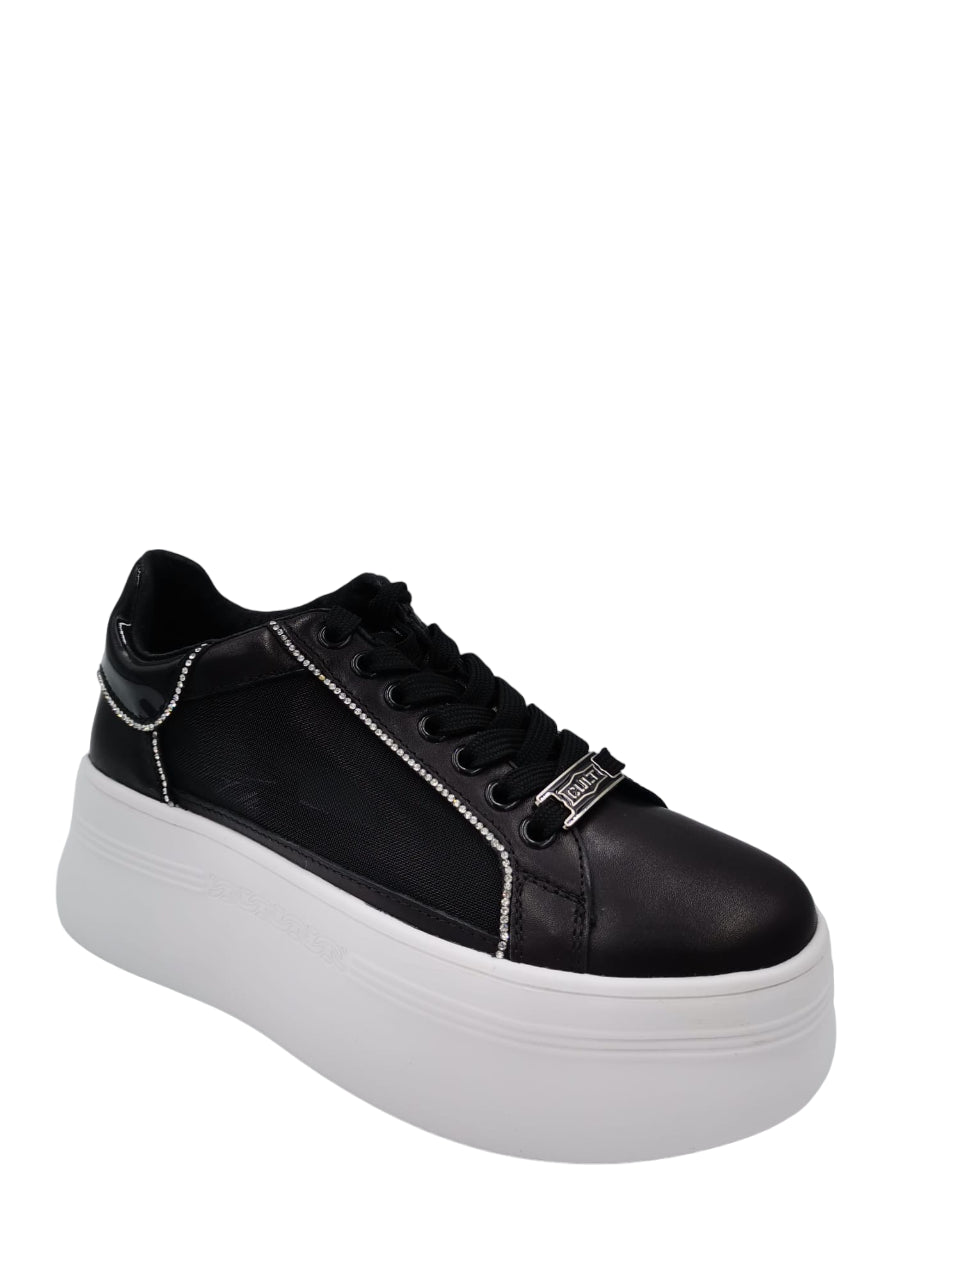 Sneakers Cult Donna Perry Nero